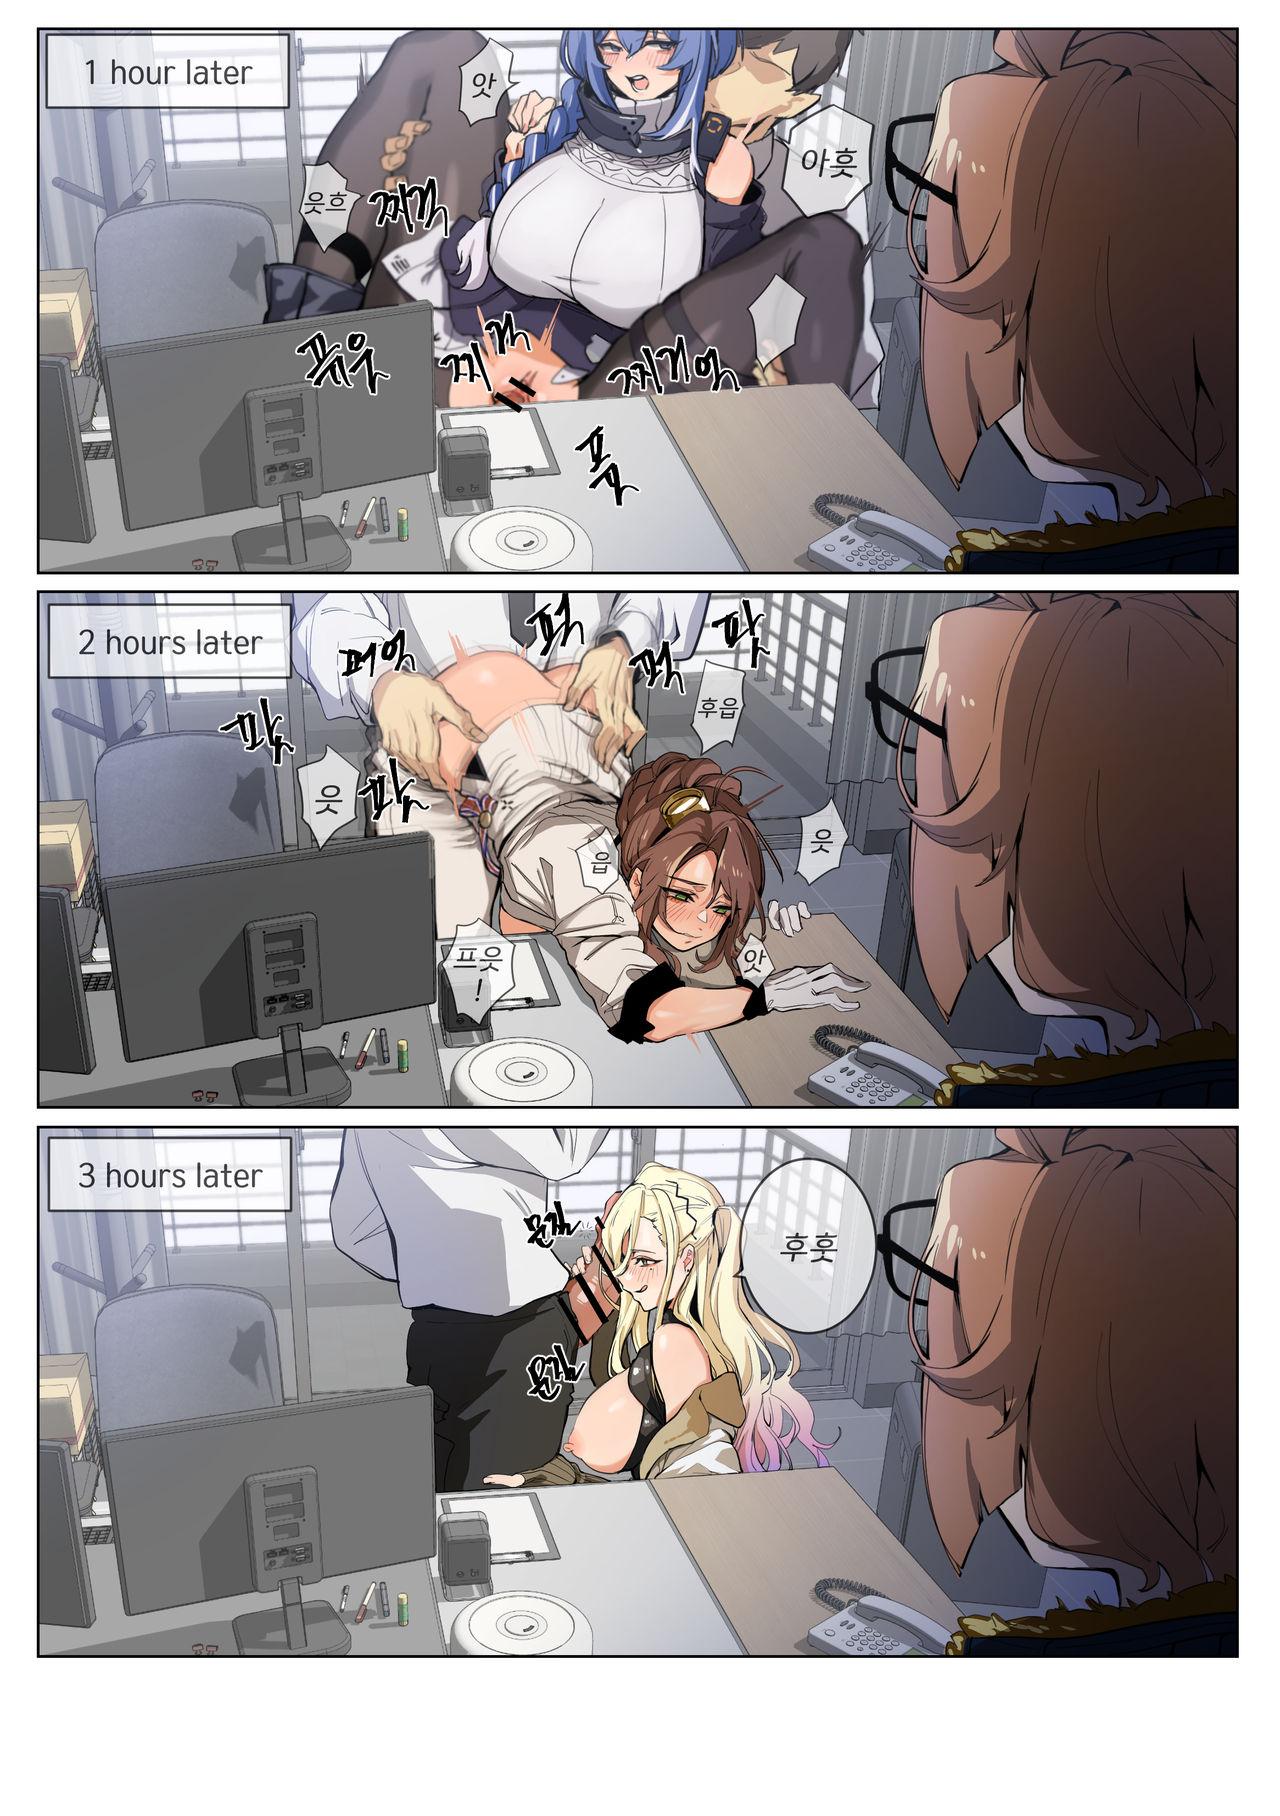 Game Grizzly - Girls frontline Hot - Page 4